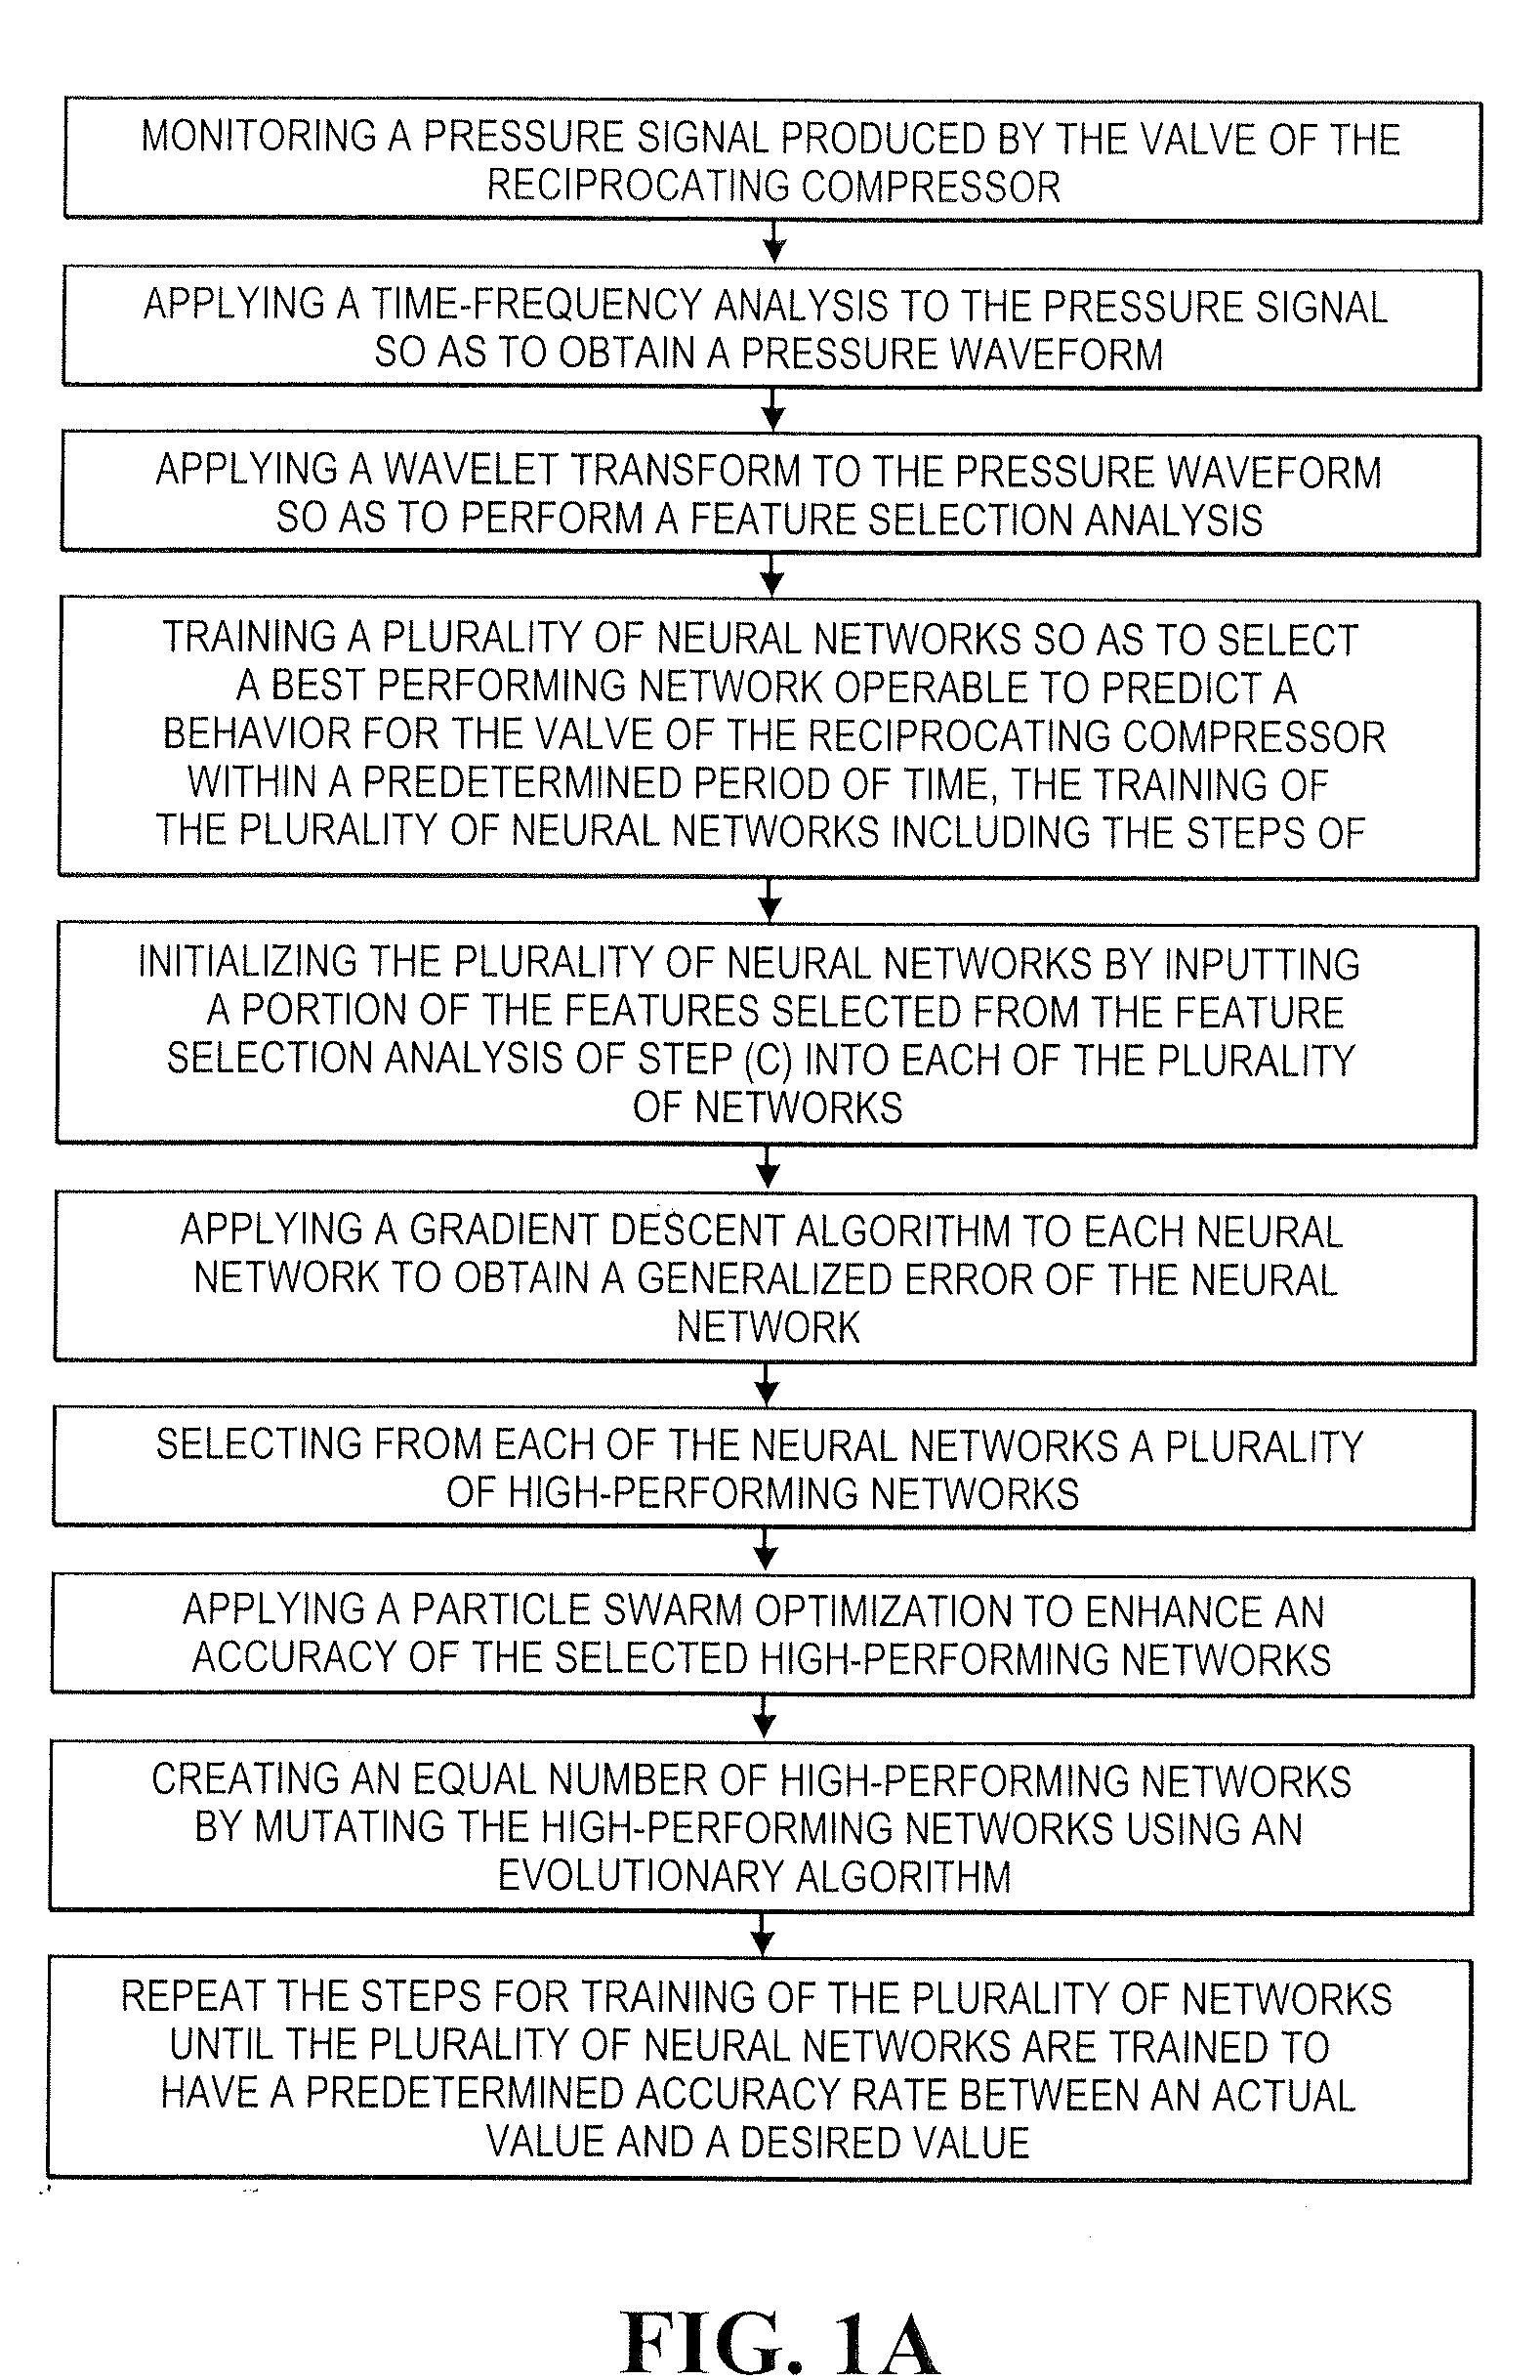 Computer program and method for detecting and predicting valve failure in a reciprocating compressor